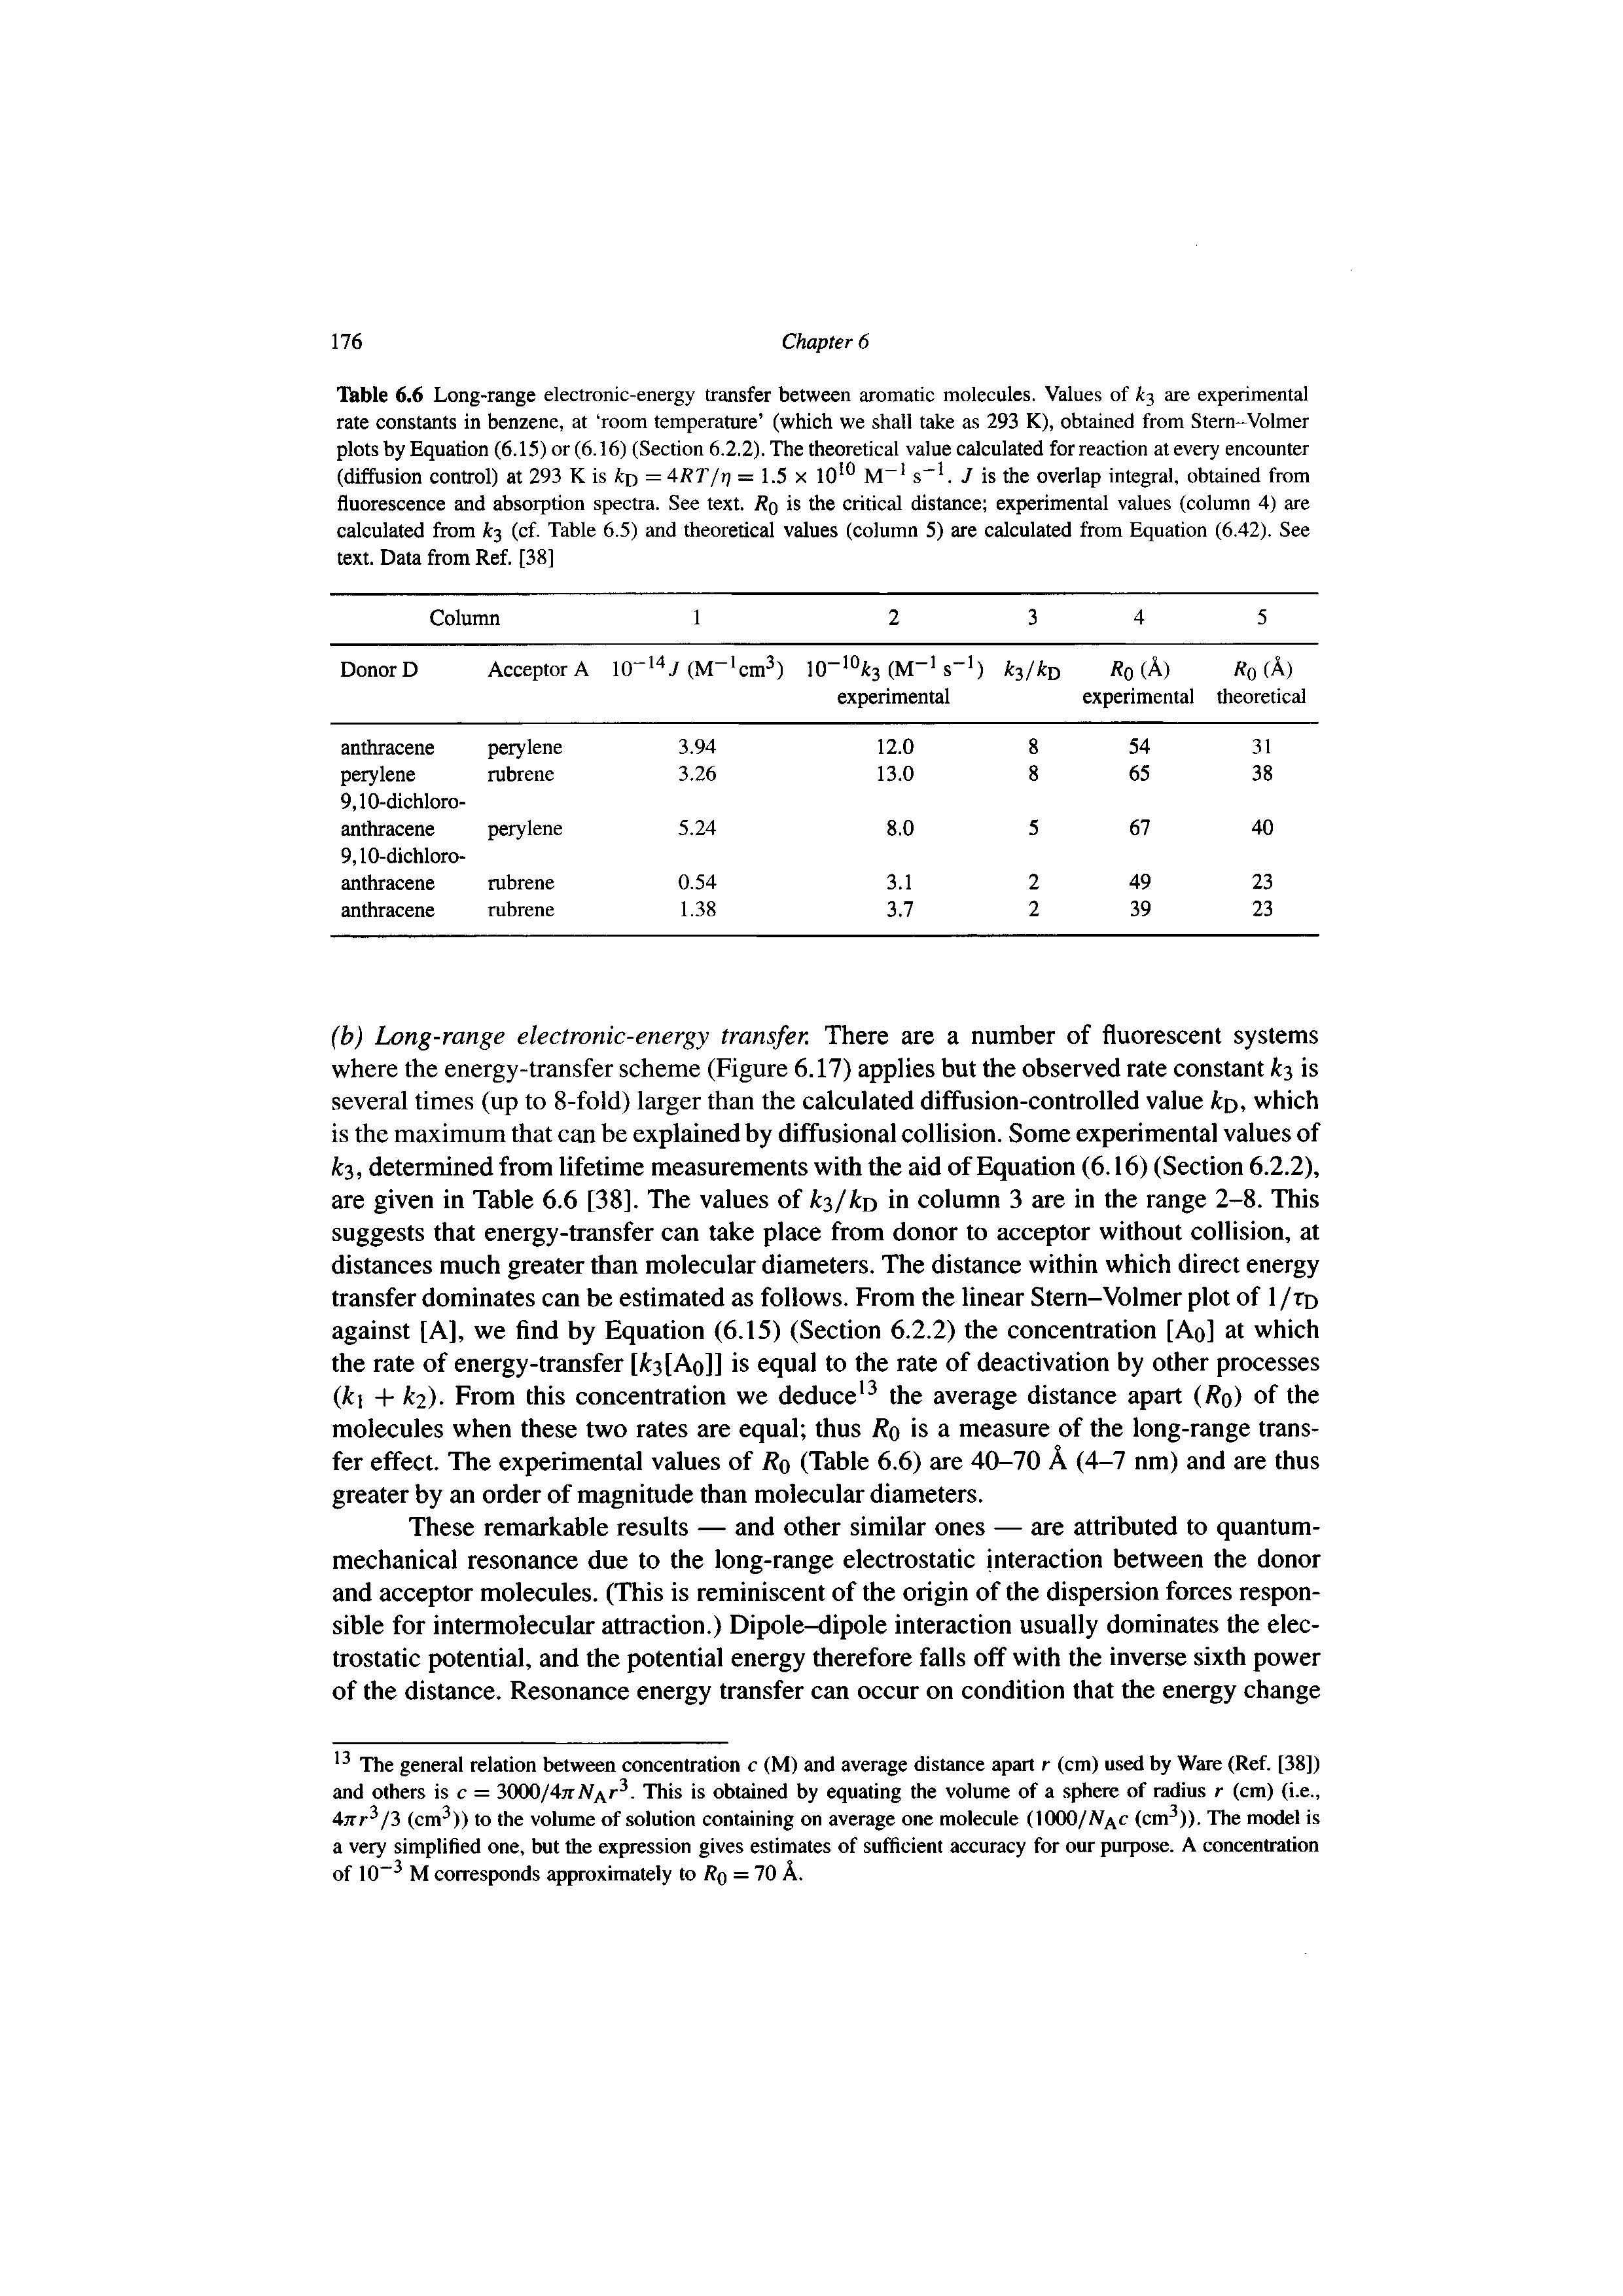 Table 6.6 Long-range electronic-energy transfer between aromatic molecules. Values of 3 are experimental rate constants in benzene, at room temperature (which we shall take as 293 K), obtained from Stem-Volmer plots by Equation (6.15) or (6.16) (Section 6.2.2). The theoretical value calculated for reaction at every encounter (diffusion control) at 293 K is ku =4RT/r) = 1.5 x lO s" . J is the overlap integral, obtained from fluorescence and absorption spectra. See text. Rq is the critical distance experimental values (column 4) are calculated from 3 (cf. Table 6.5) and theoretical values (column 5) are calculated from Equation (6.42). See text. Data from Ref. [38]...